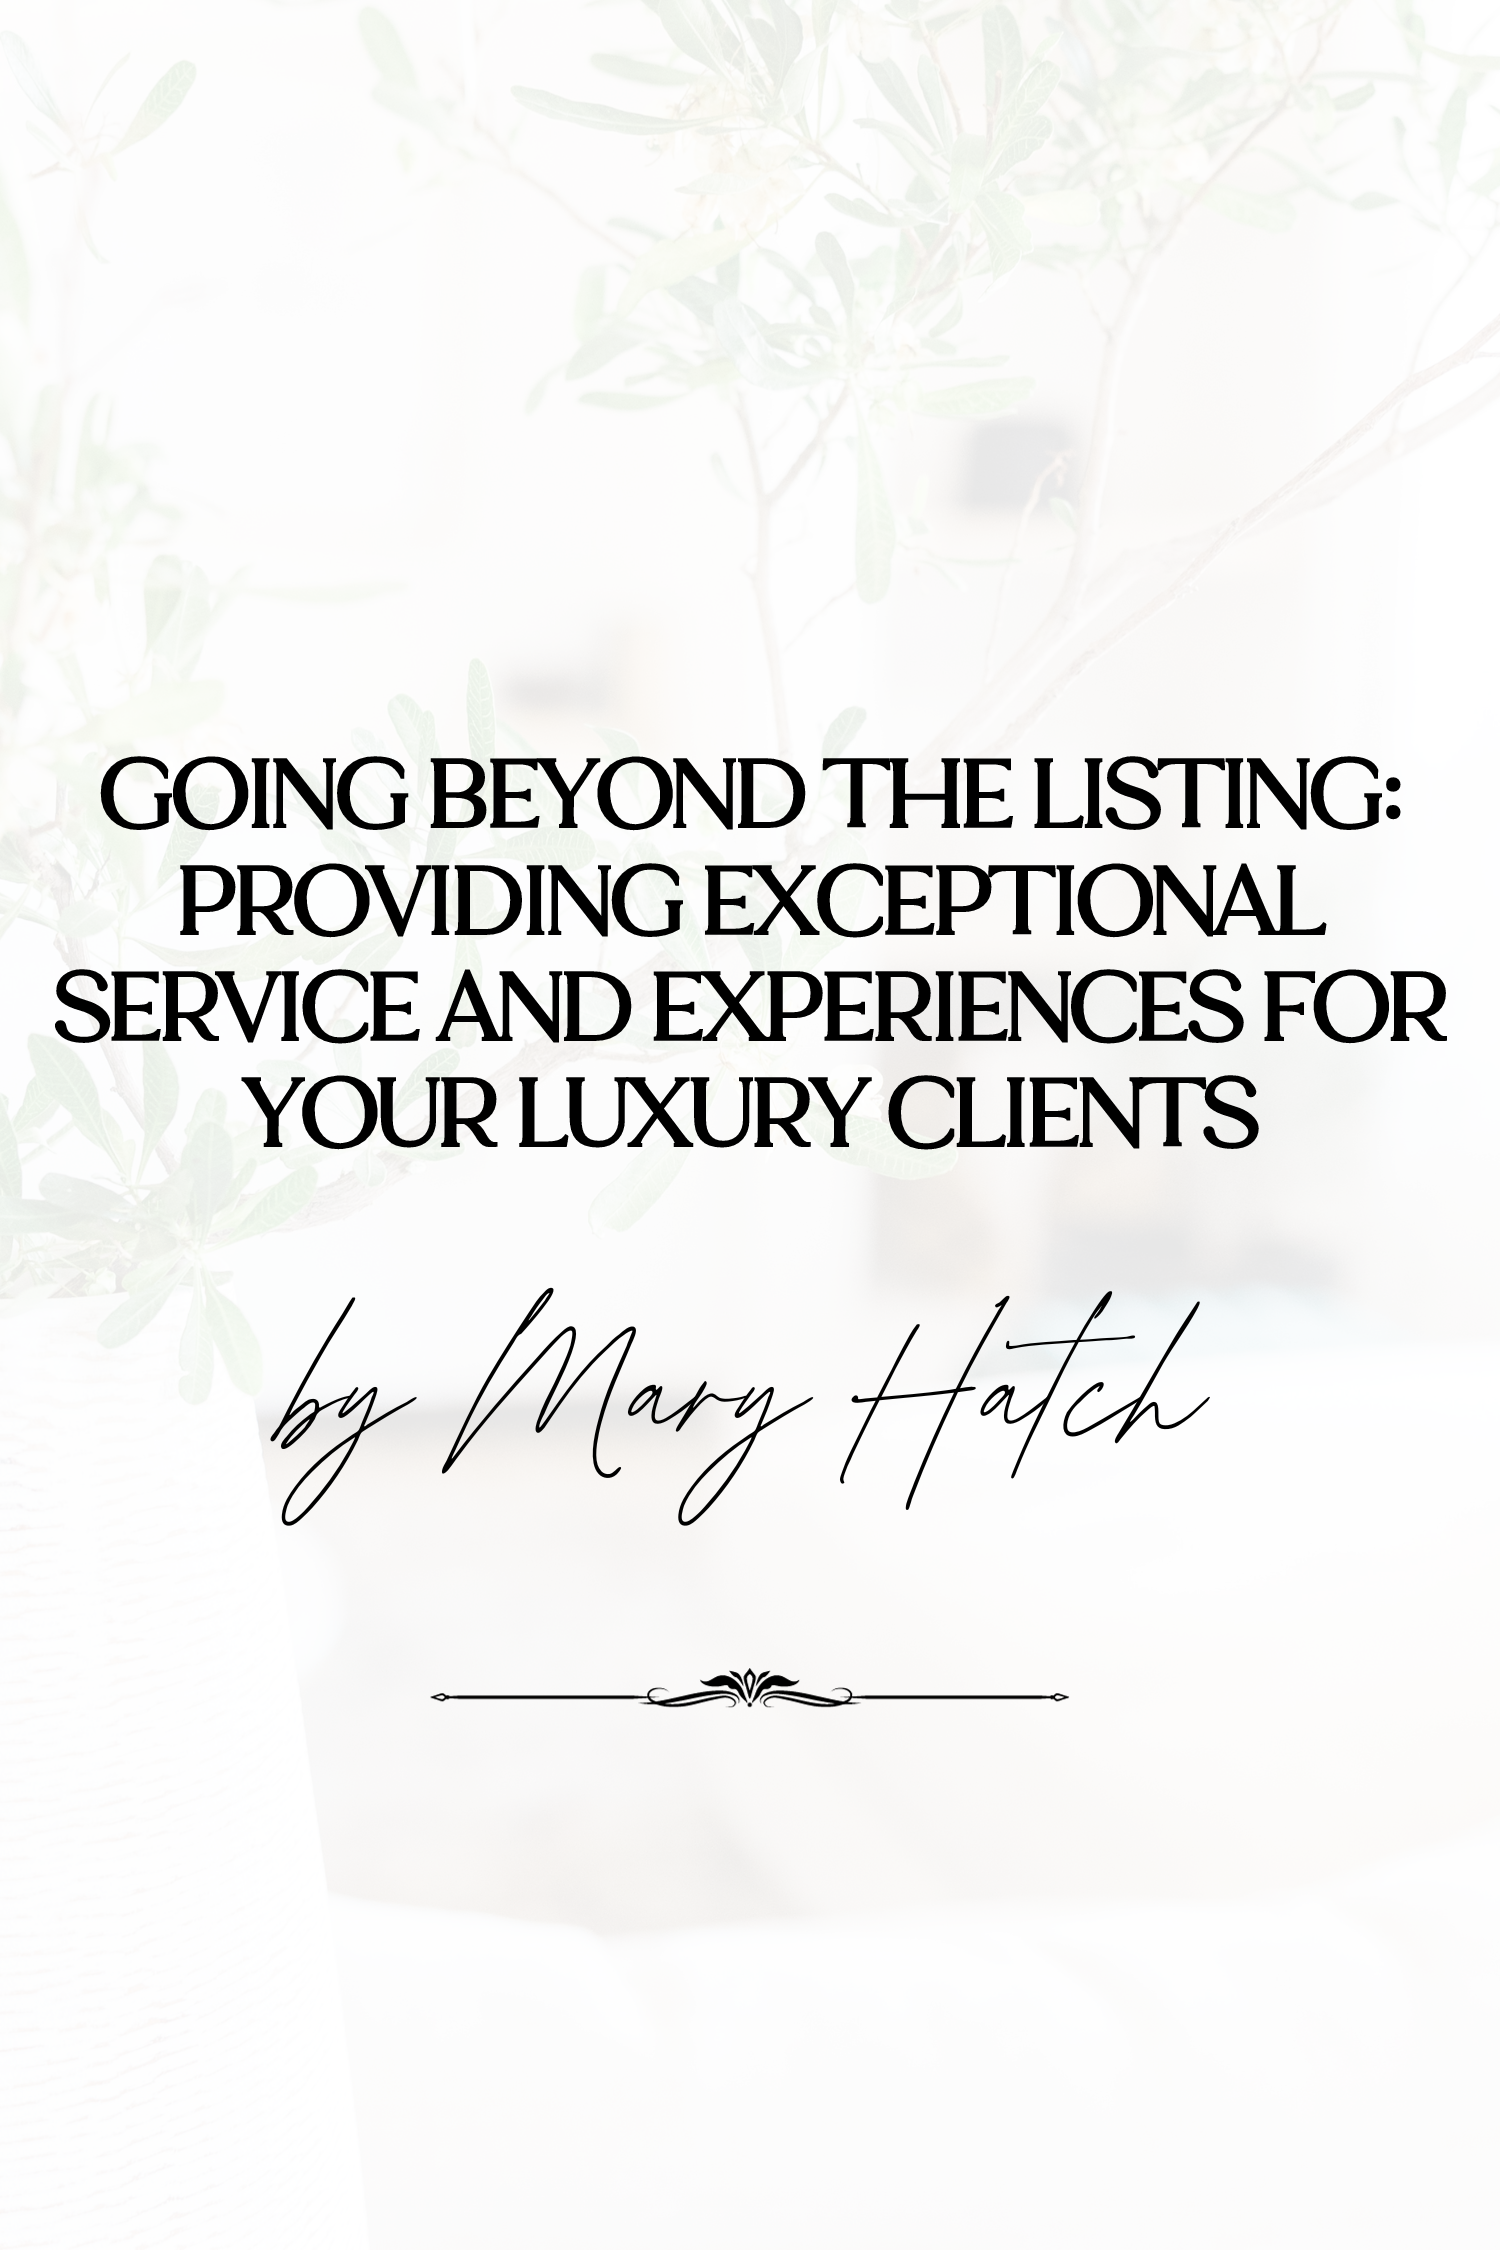 Going Beyond the Listing: Providing Exceptional Service and Experiences for Your Luxury Clients